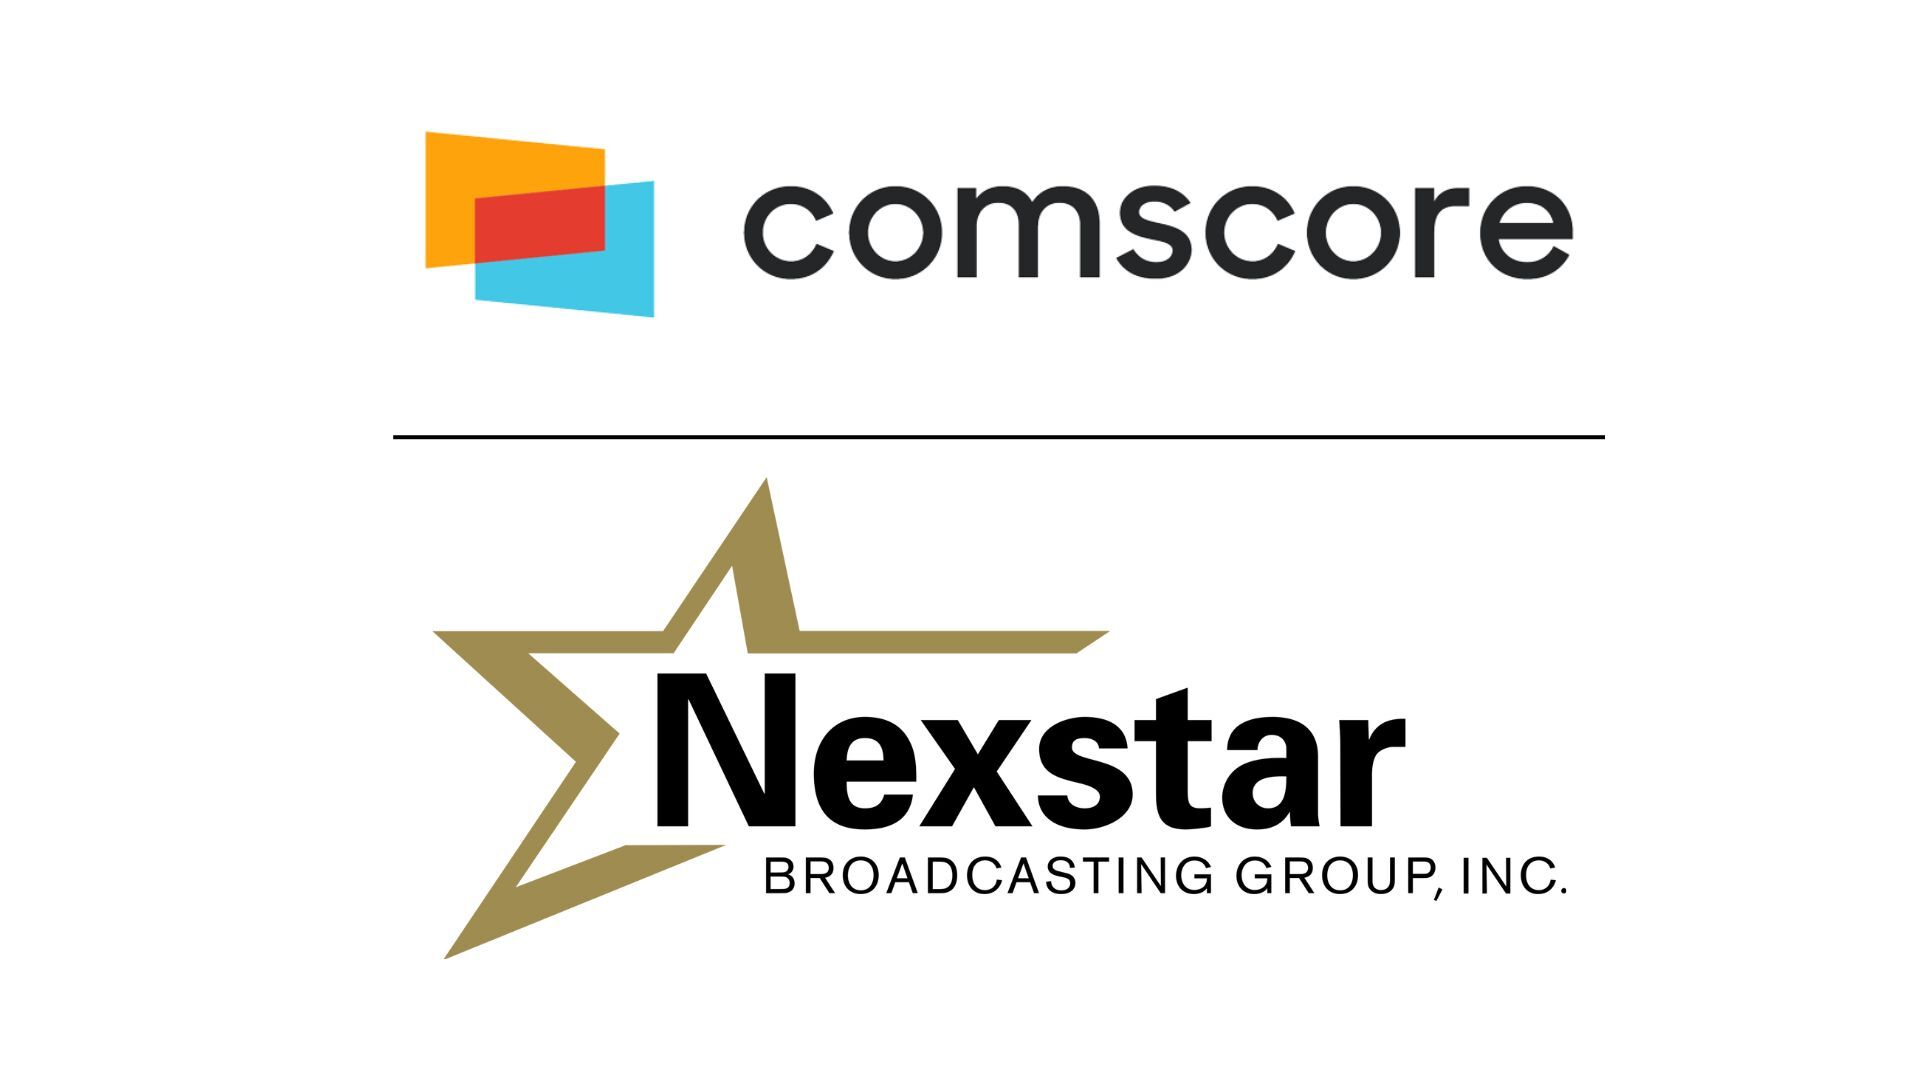 Comscore and Nexstar Reach Multi-Year Agreement for Linear and Cross-Platform Audience Measurement